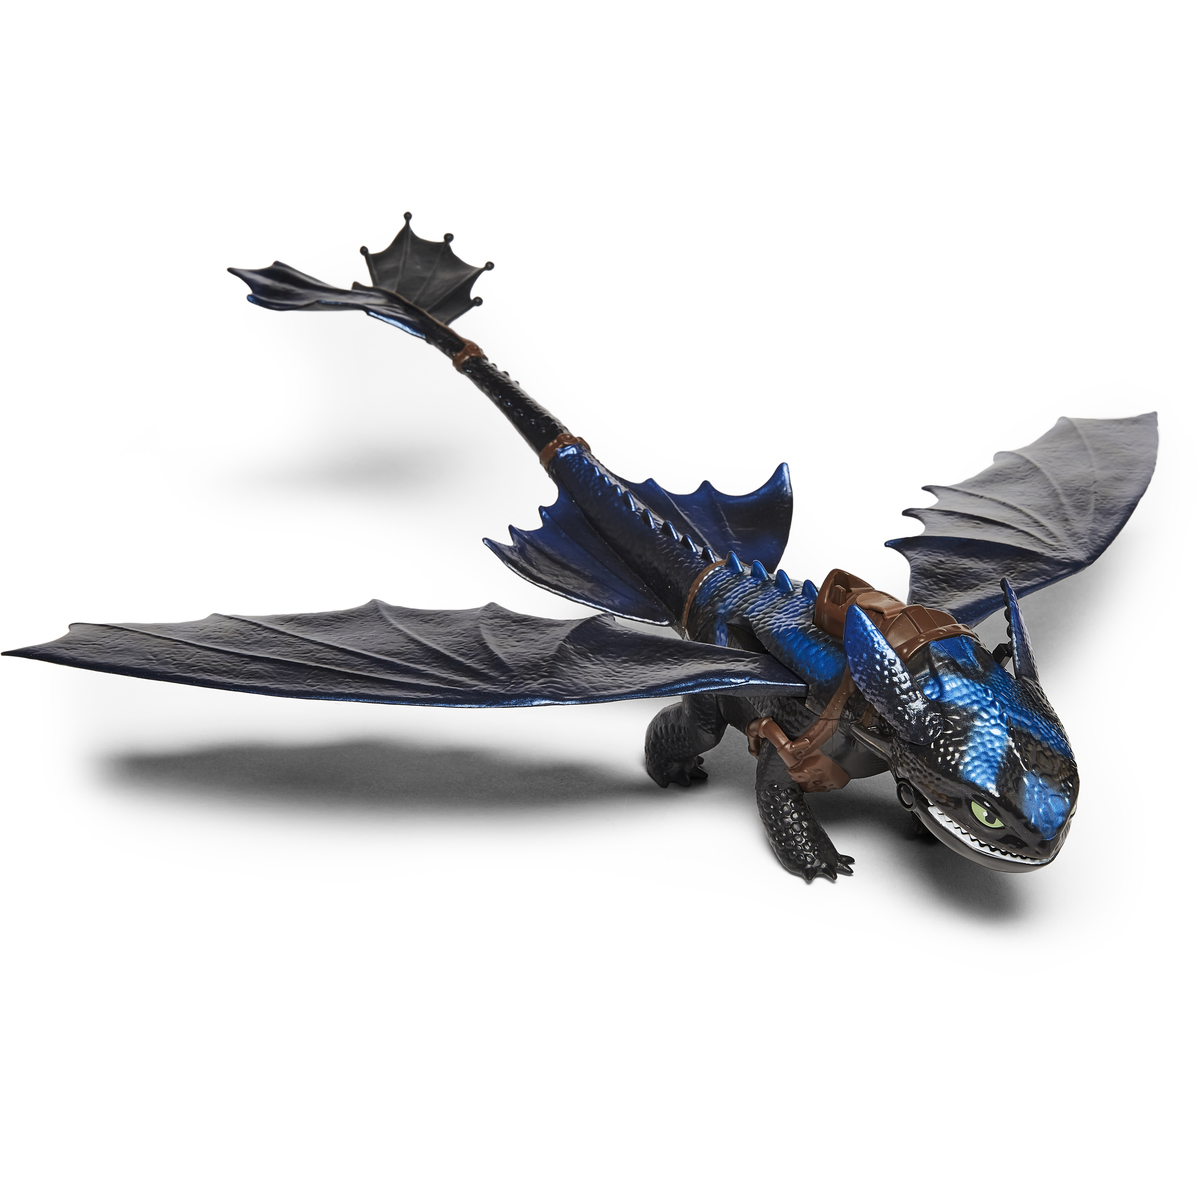 fire breathing toothless toy